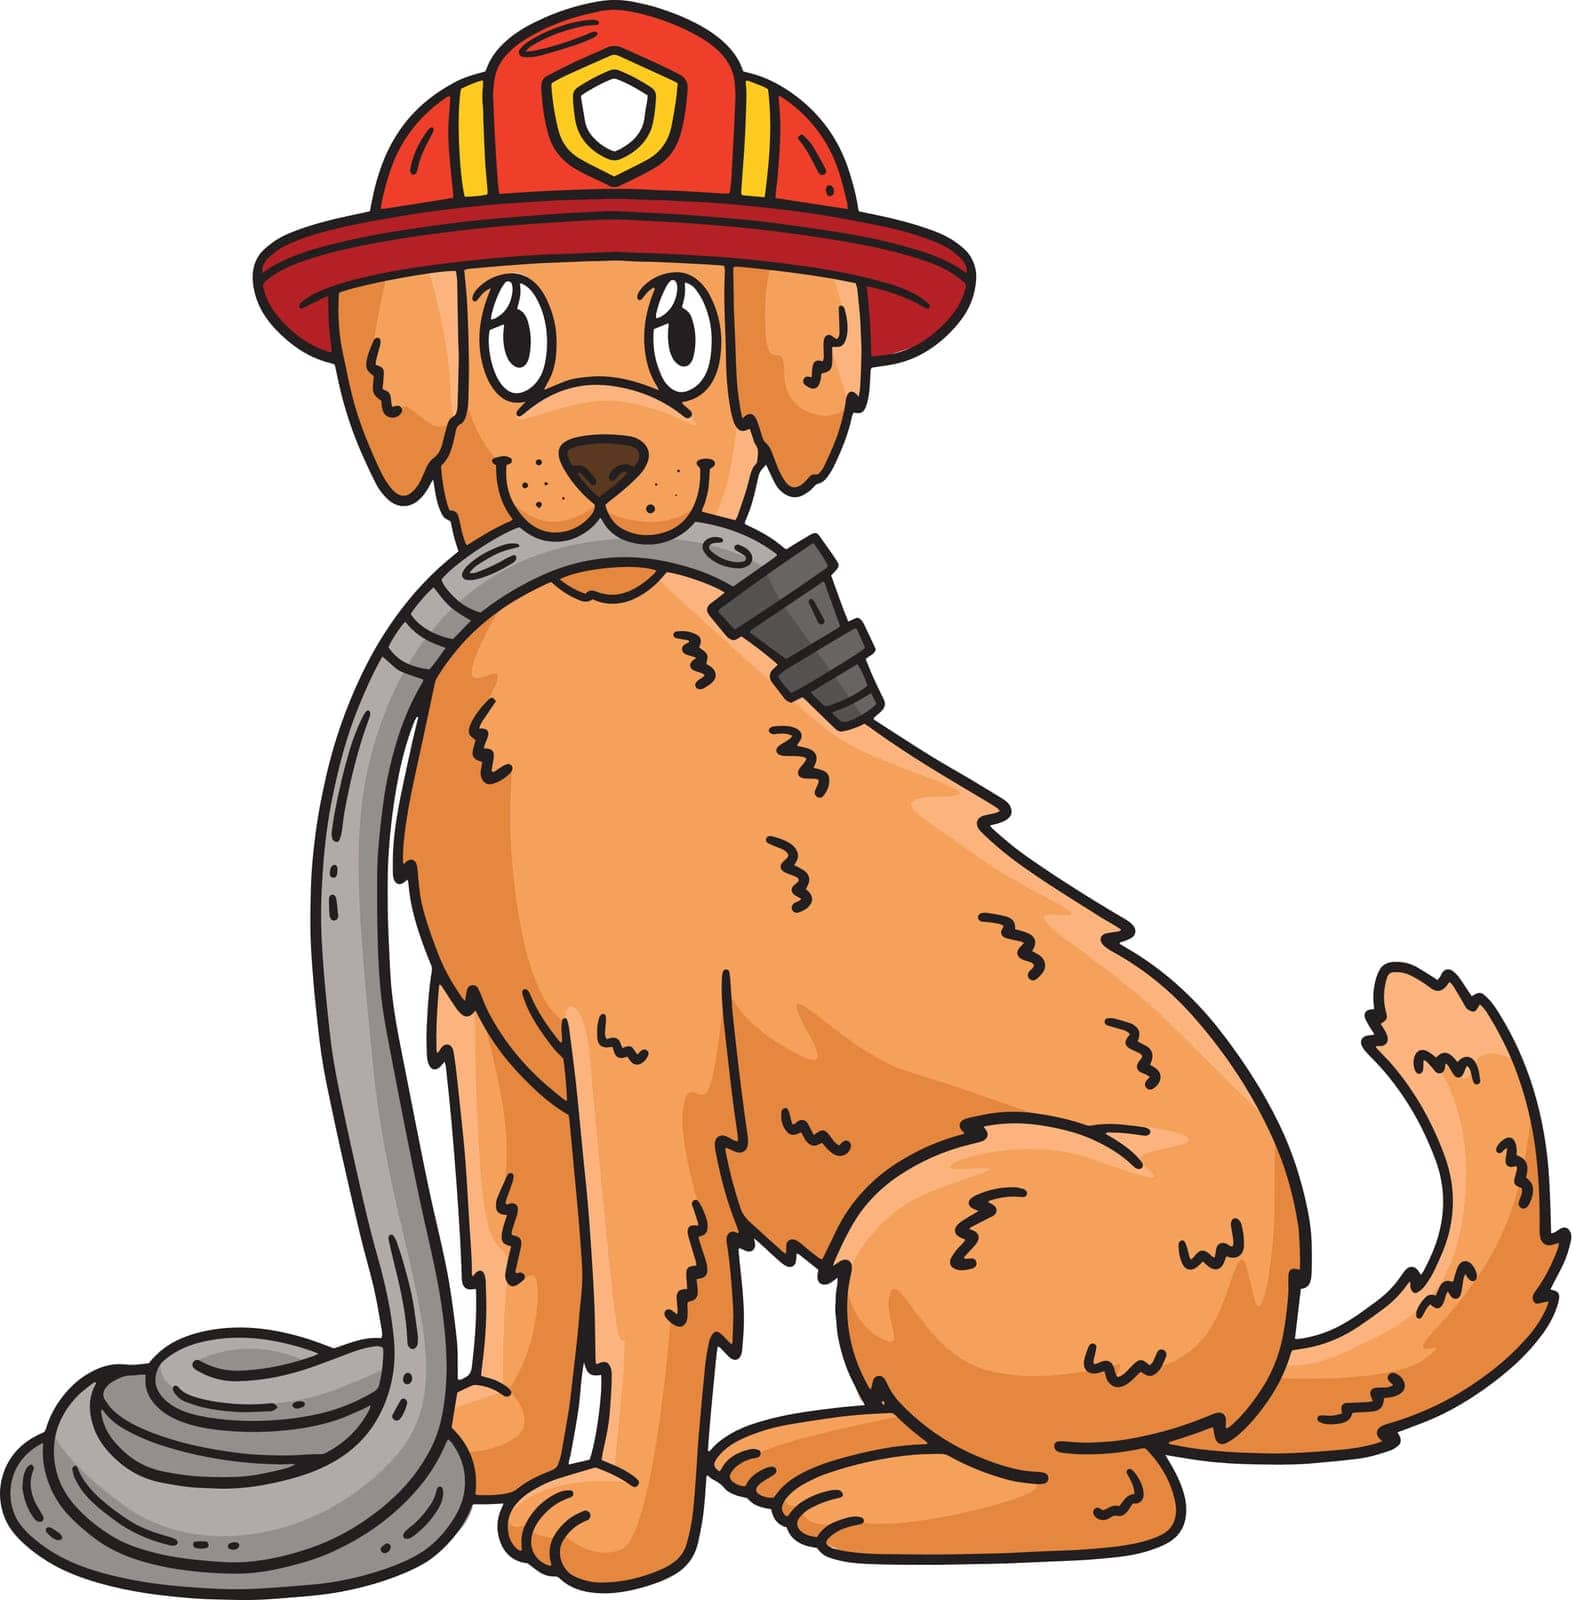 This cartoon clipart shows a Firefighter Dog illustration.